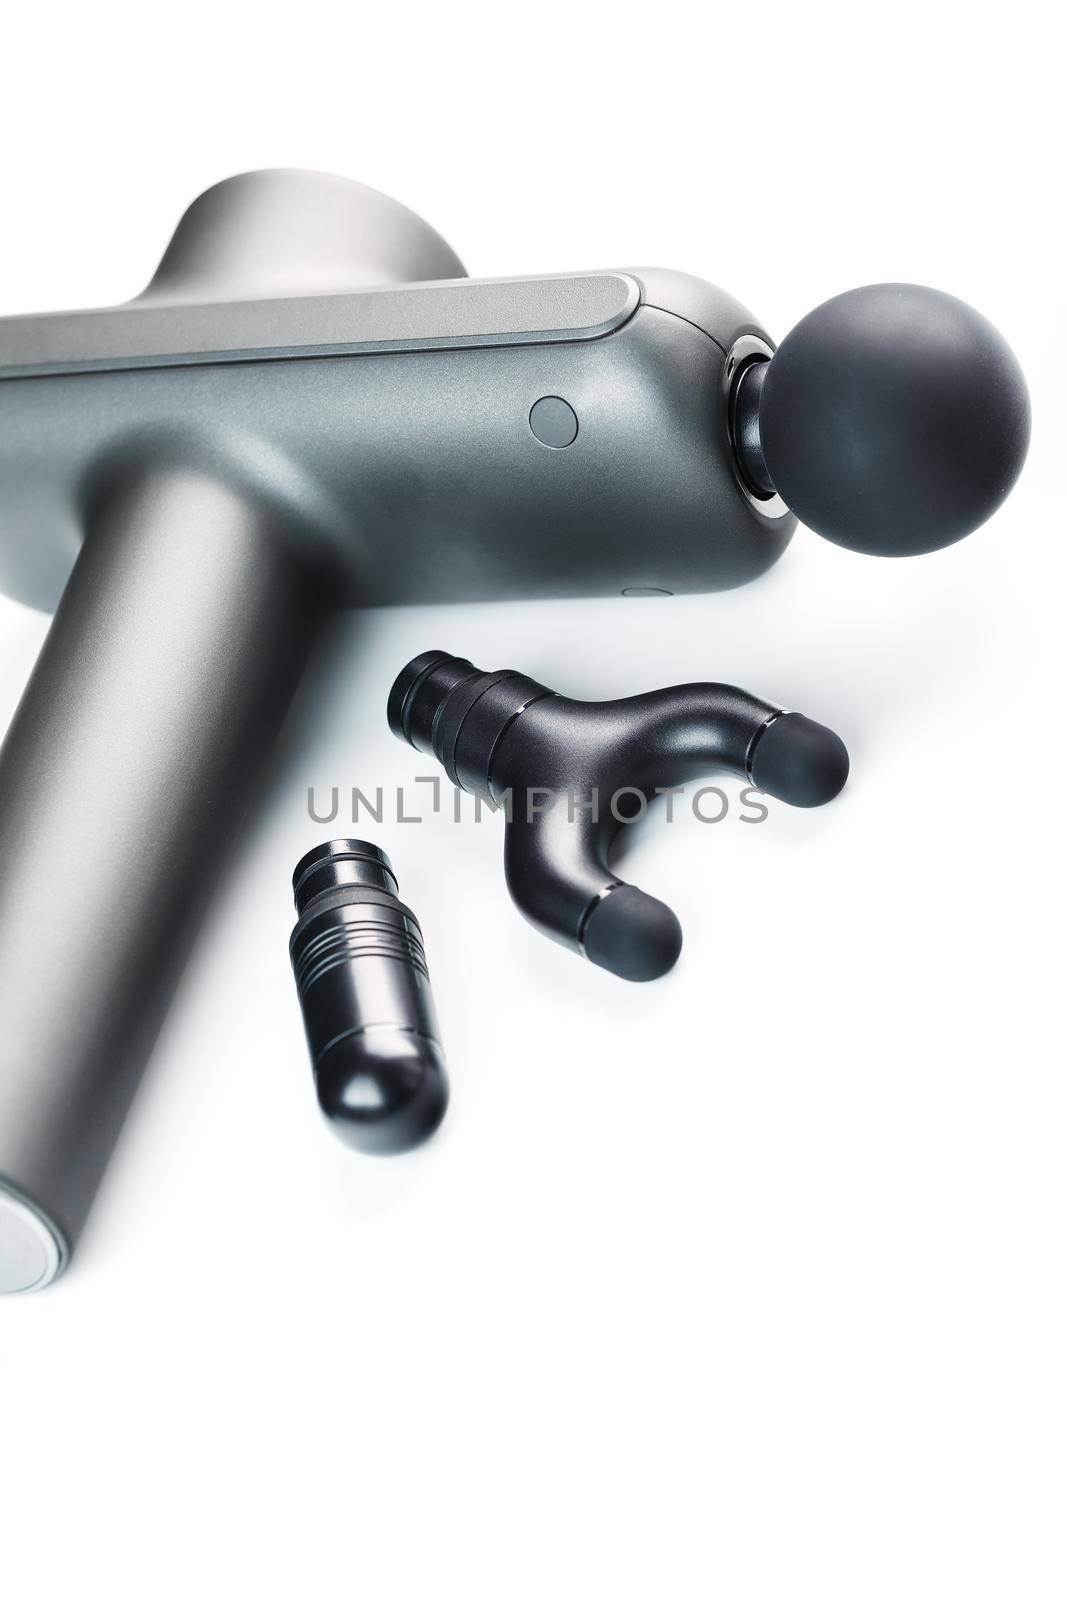 Electric body massager with various attachments on a white background. Isolate